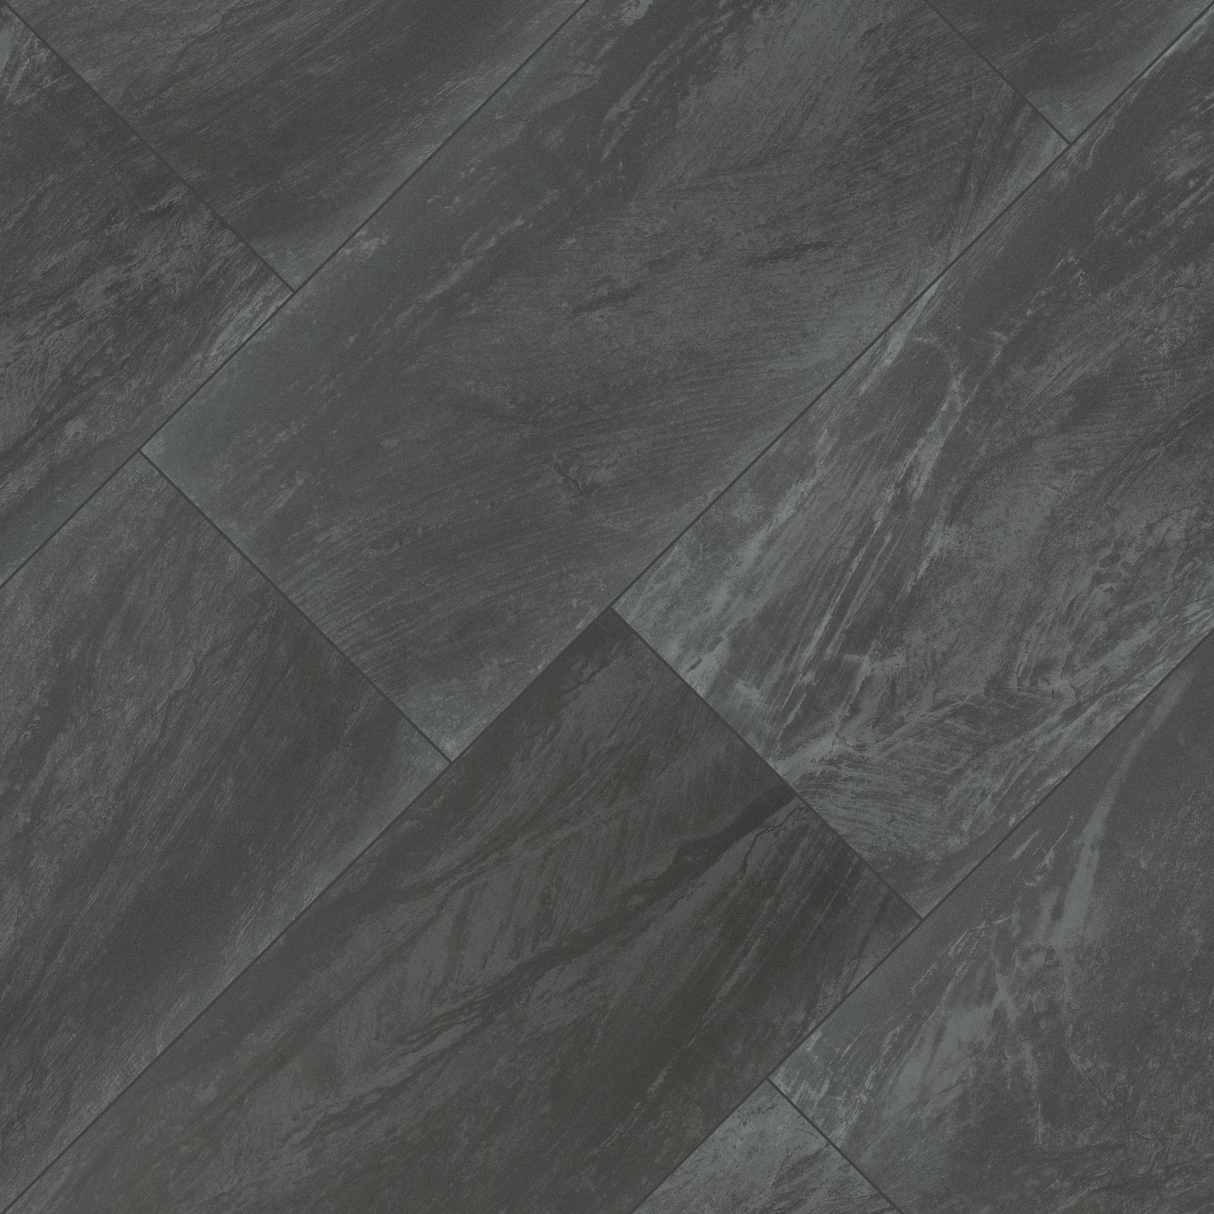 Durban anthracite 24x48 polished porcelain NDURANT2448P floor and wall tile  msi collection product shot angle view